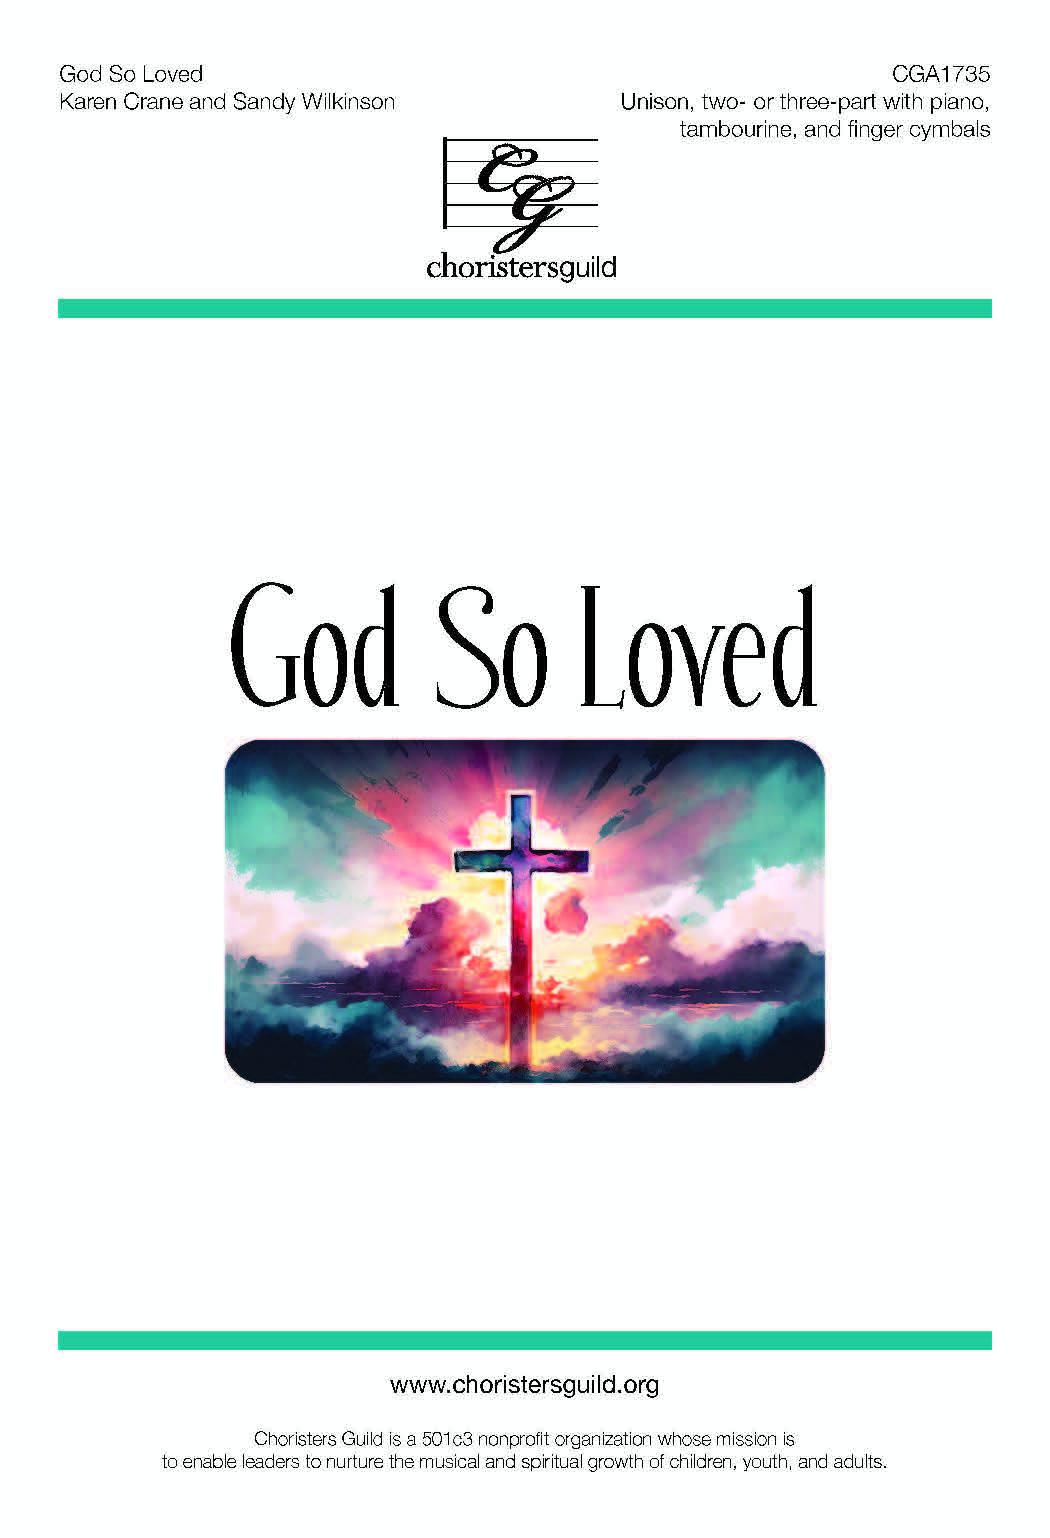 God So Loved - Unison/Two/Three-part